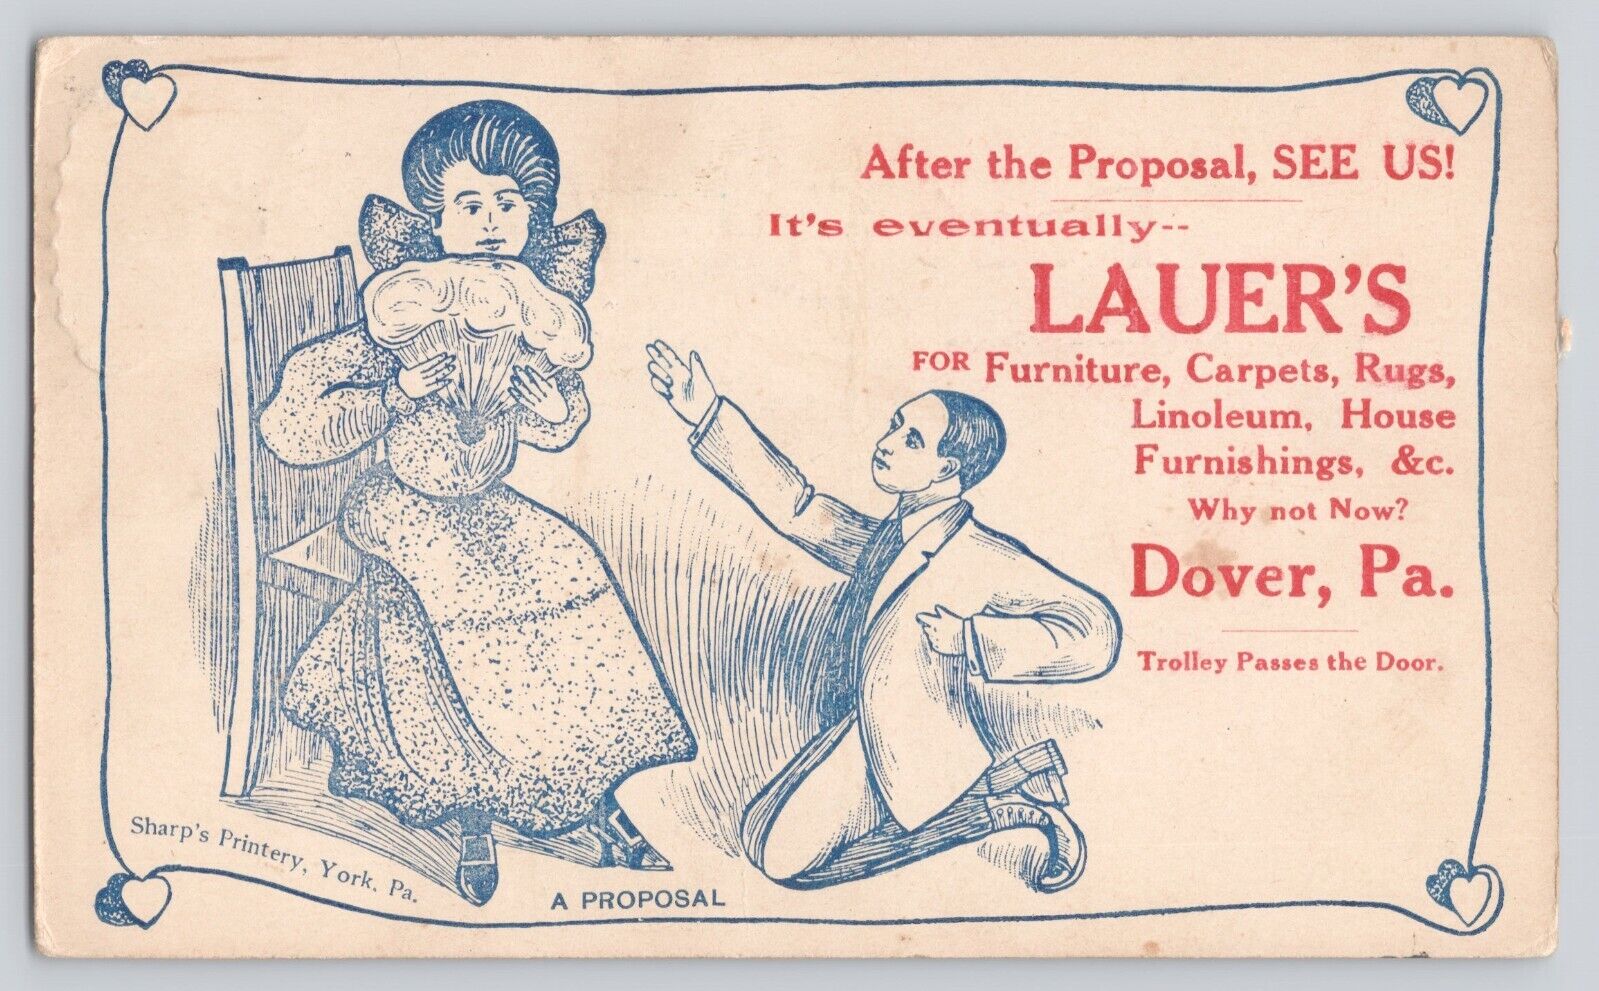 Postcard Advertising Dover Pennsylvania Lauer's Furniture Carpets Rugs Proposal